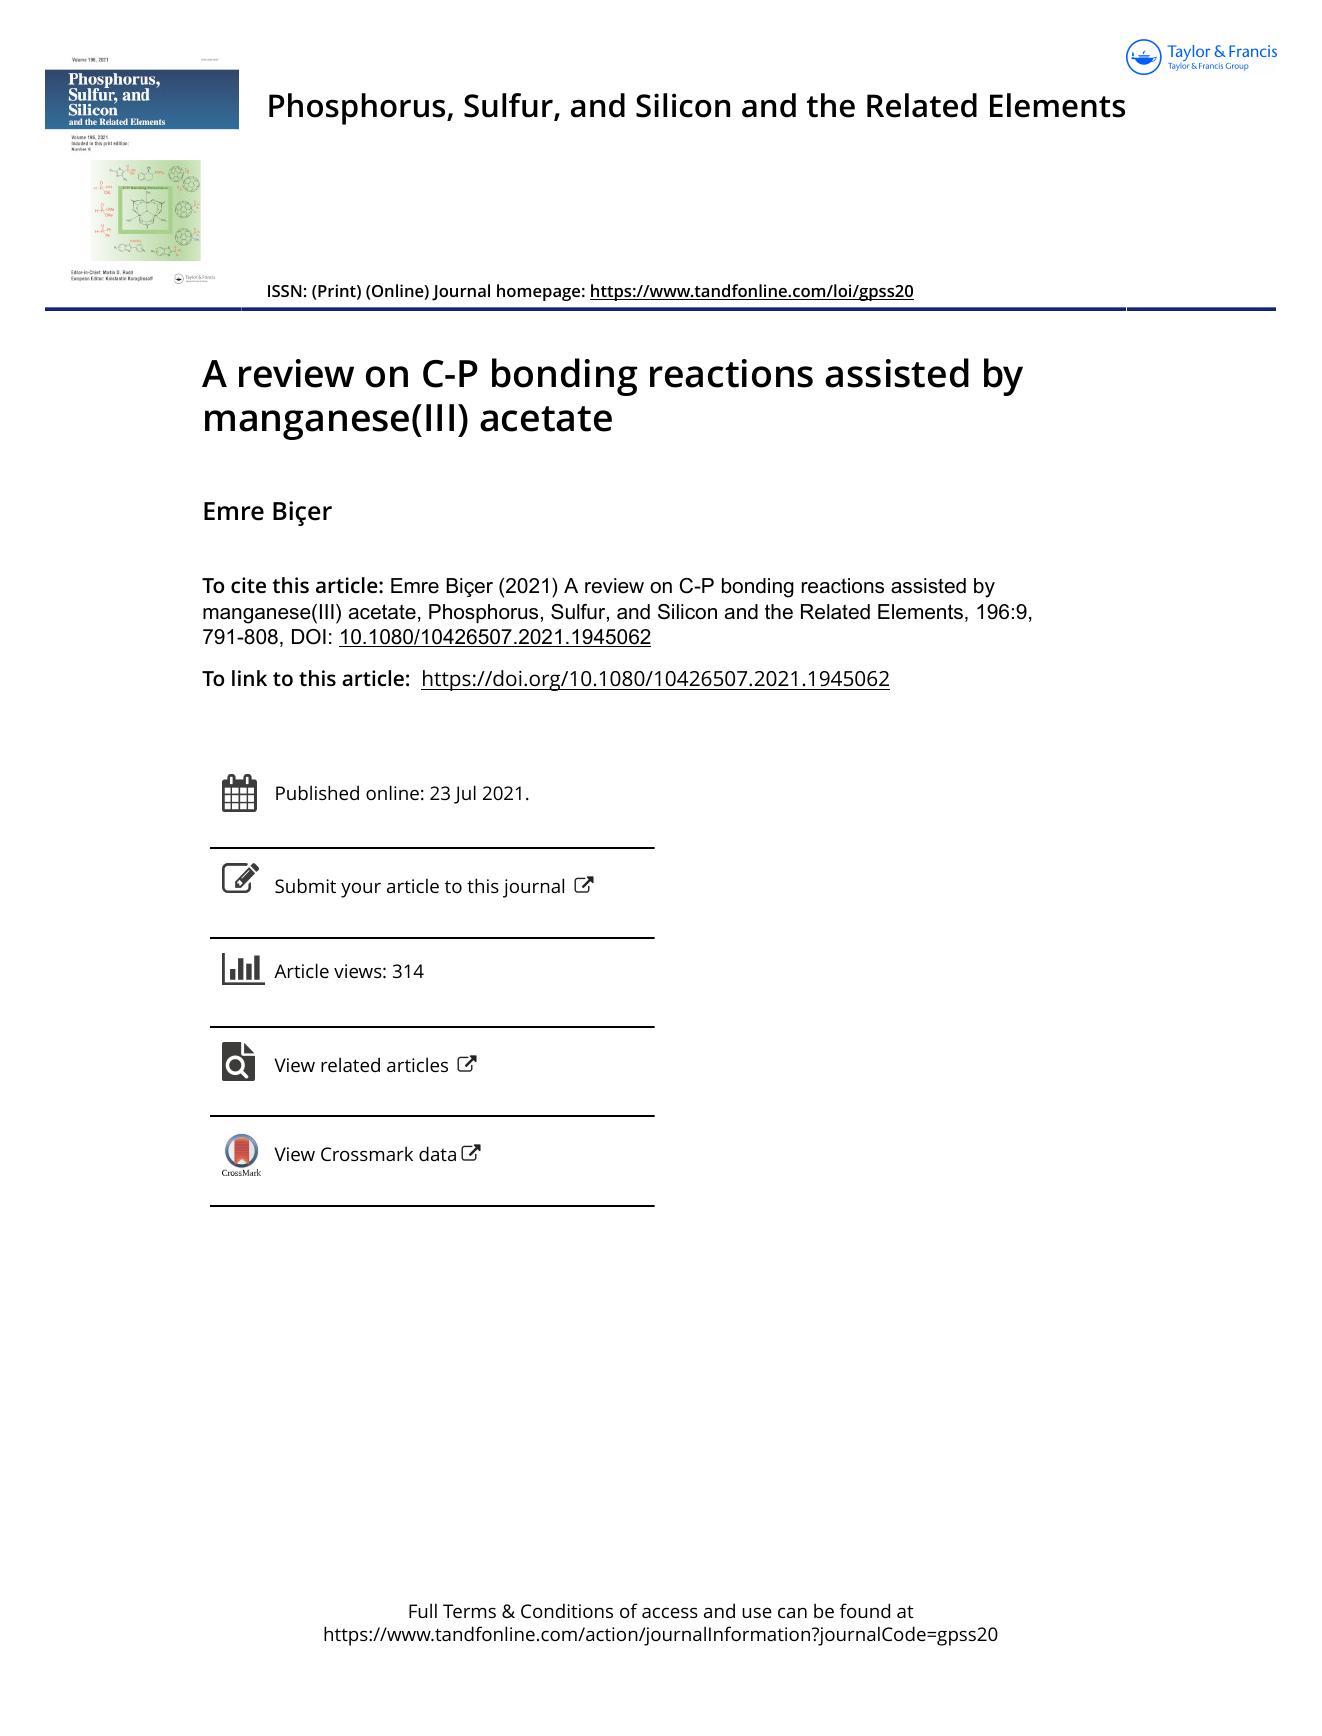 A review on C-P bonding reactions assisted by manganese(III) acetate by Biçer Emre